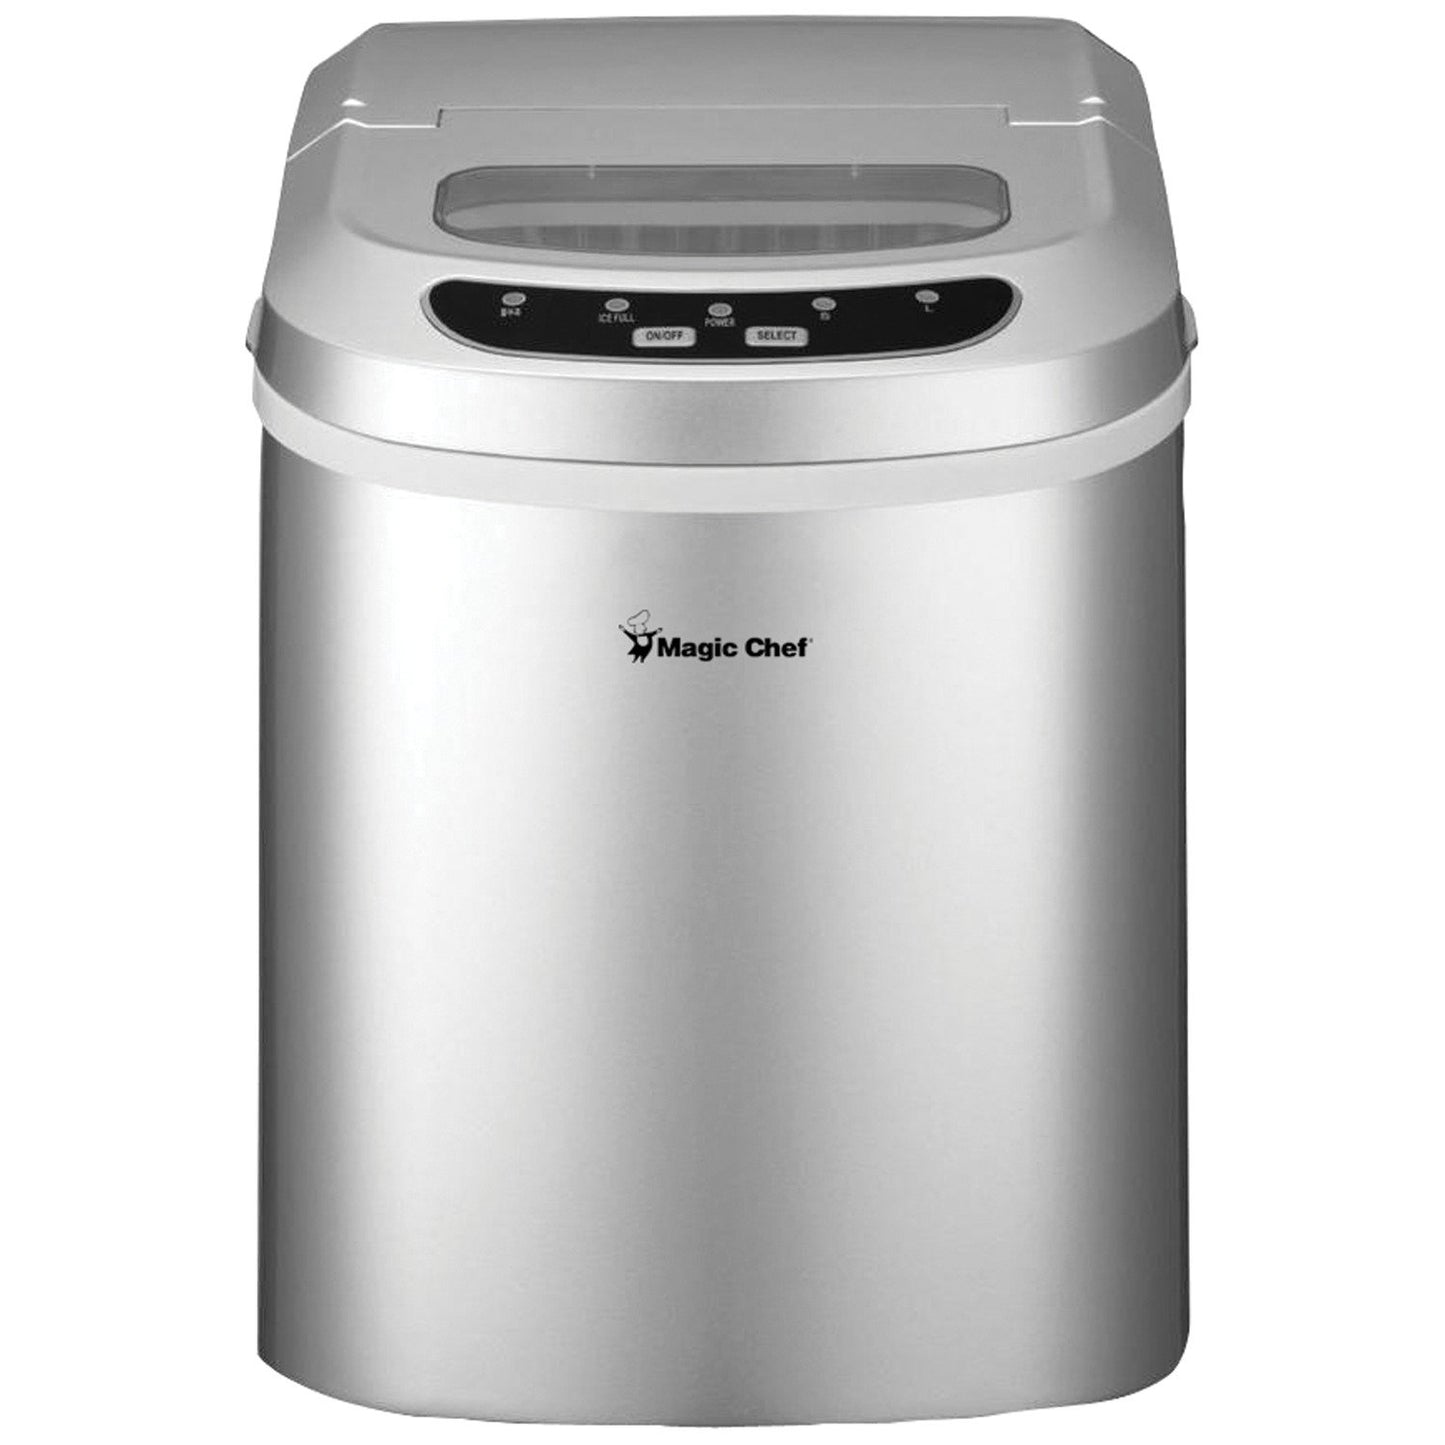 MAGIC CHEF MCIM22SV 27-Pound-Capacity Portable Ice Maker (Silver with Silver Top)